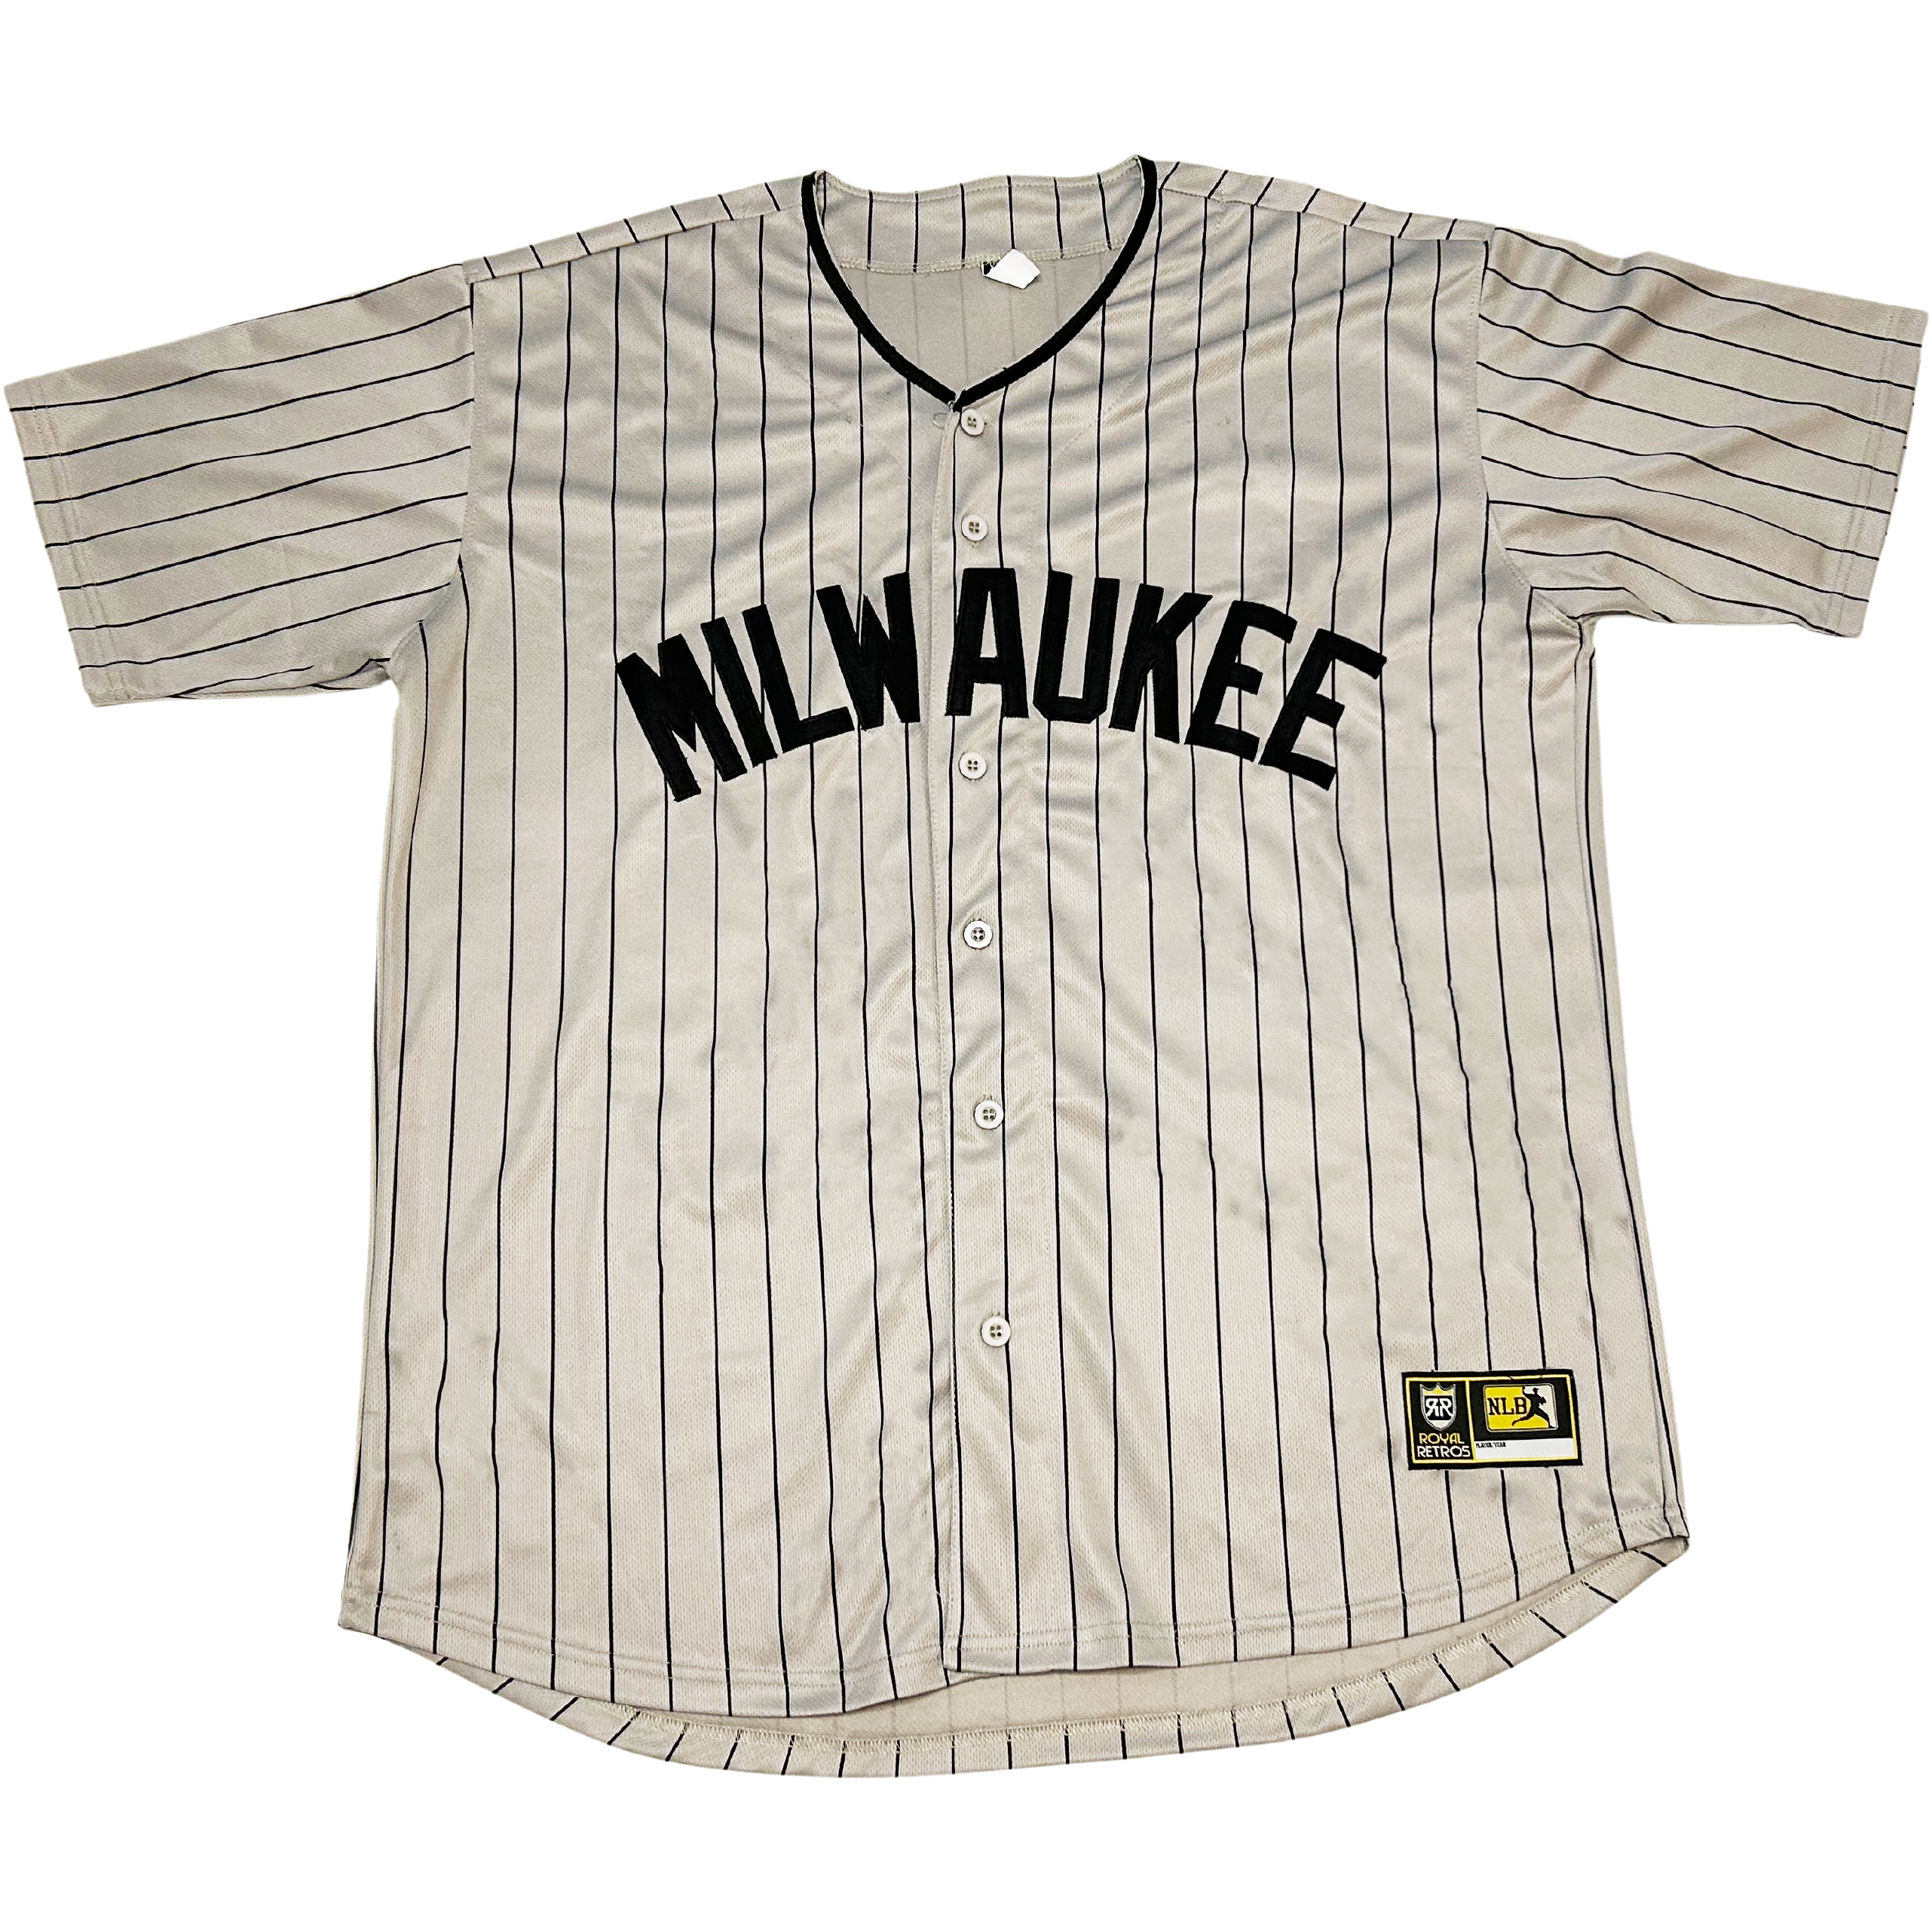 NEW WITH TAGS! MILWAUKEE BREWERS Baseball YOUTH L 12 -14 Large Jersey Top  Shirt!